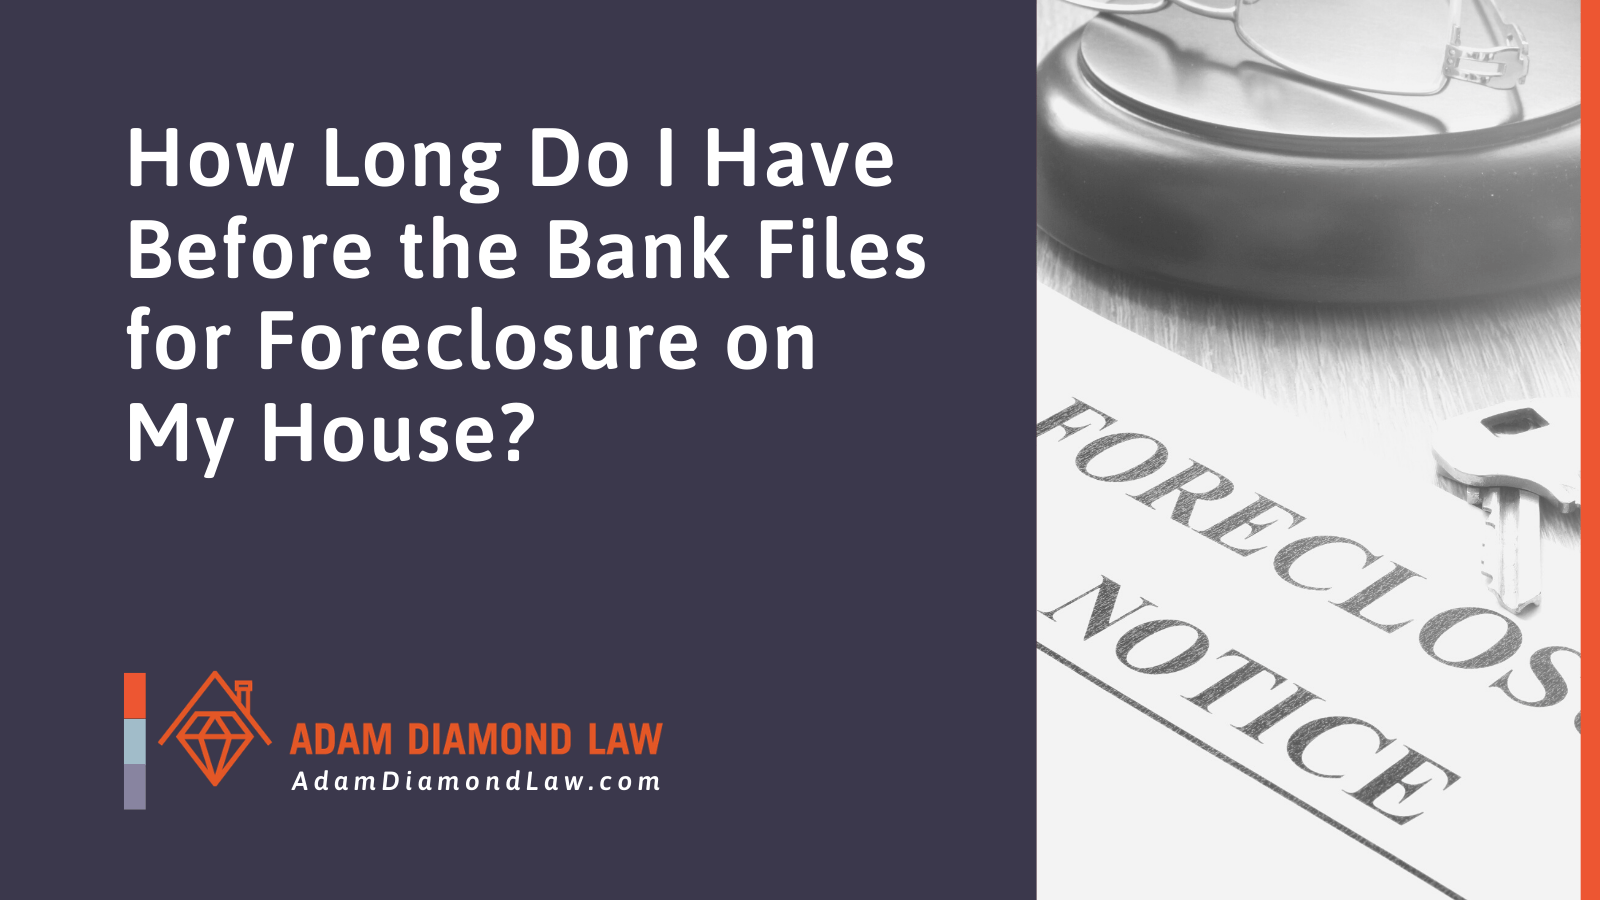 How Long Do I Have Before the Bank Files for Foreclosure on My House - Adam Diamond Law | McHenry, IL Residential Real Estate Lawyer